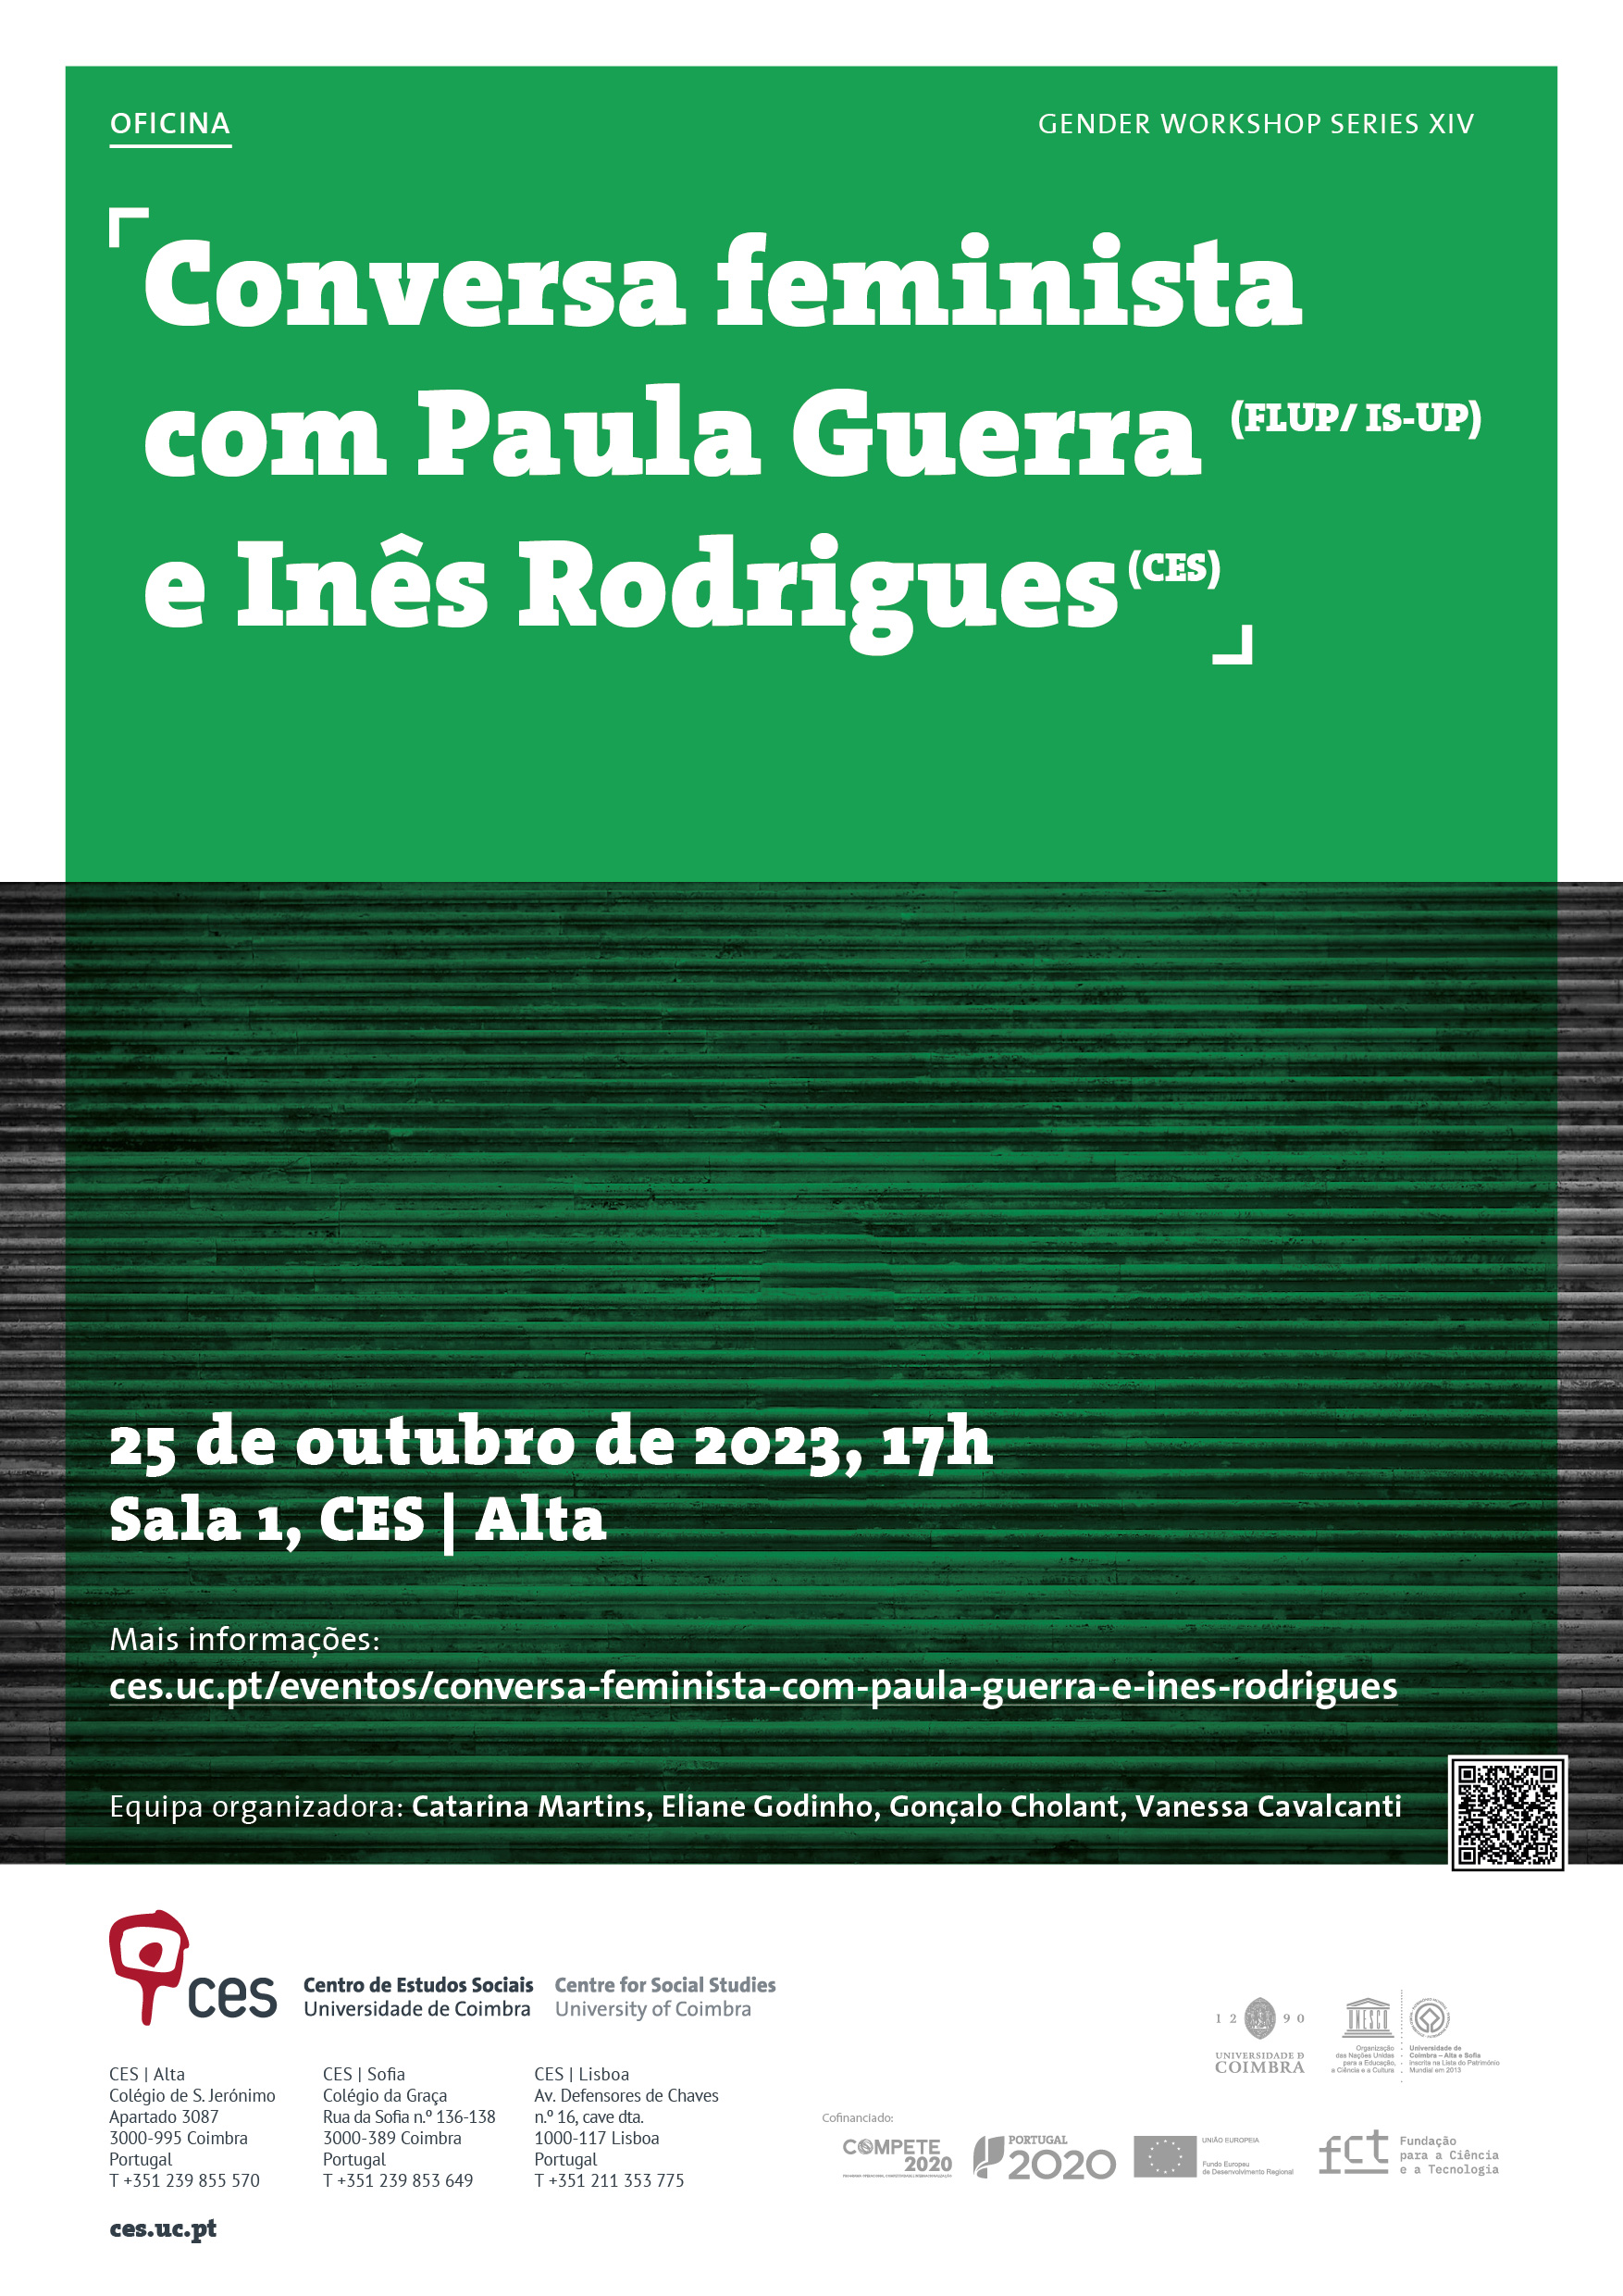 Feminist Talk with Paula Guerra and Inês Rodrigues<span id="edit_44204"><script>$(function() { $('#edit_44204').load( "/myces/user/editobj.php?tipo=evento&id=44204" ); });</script></span>